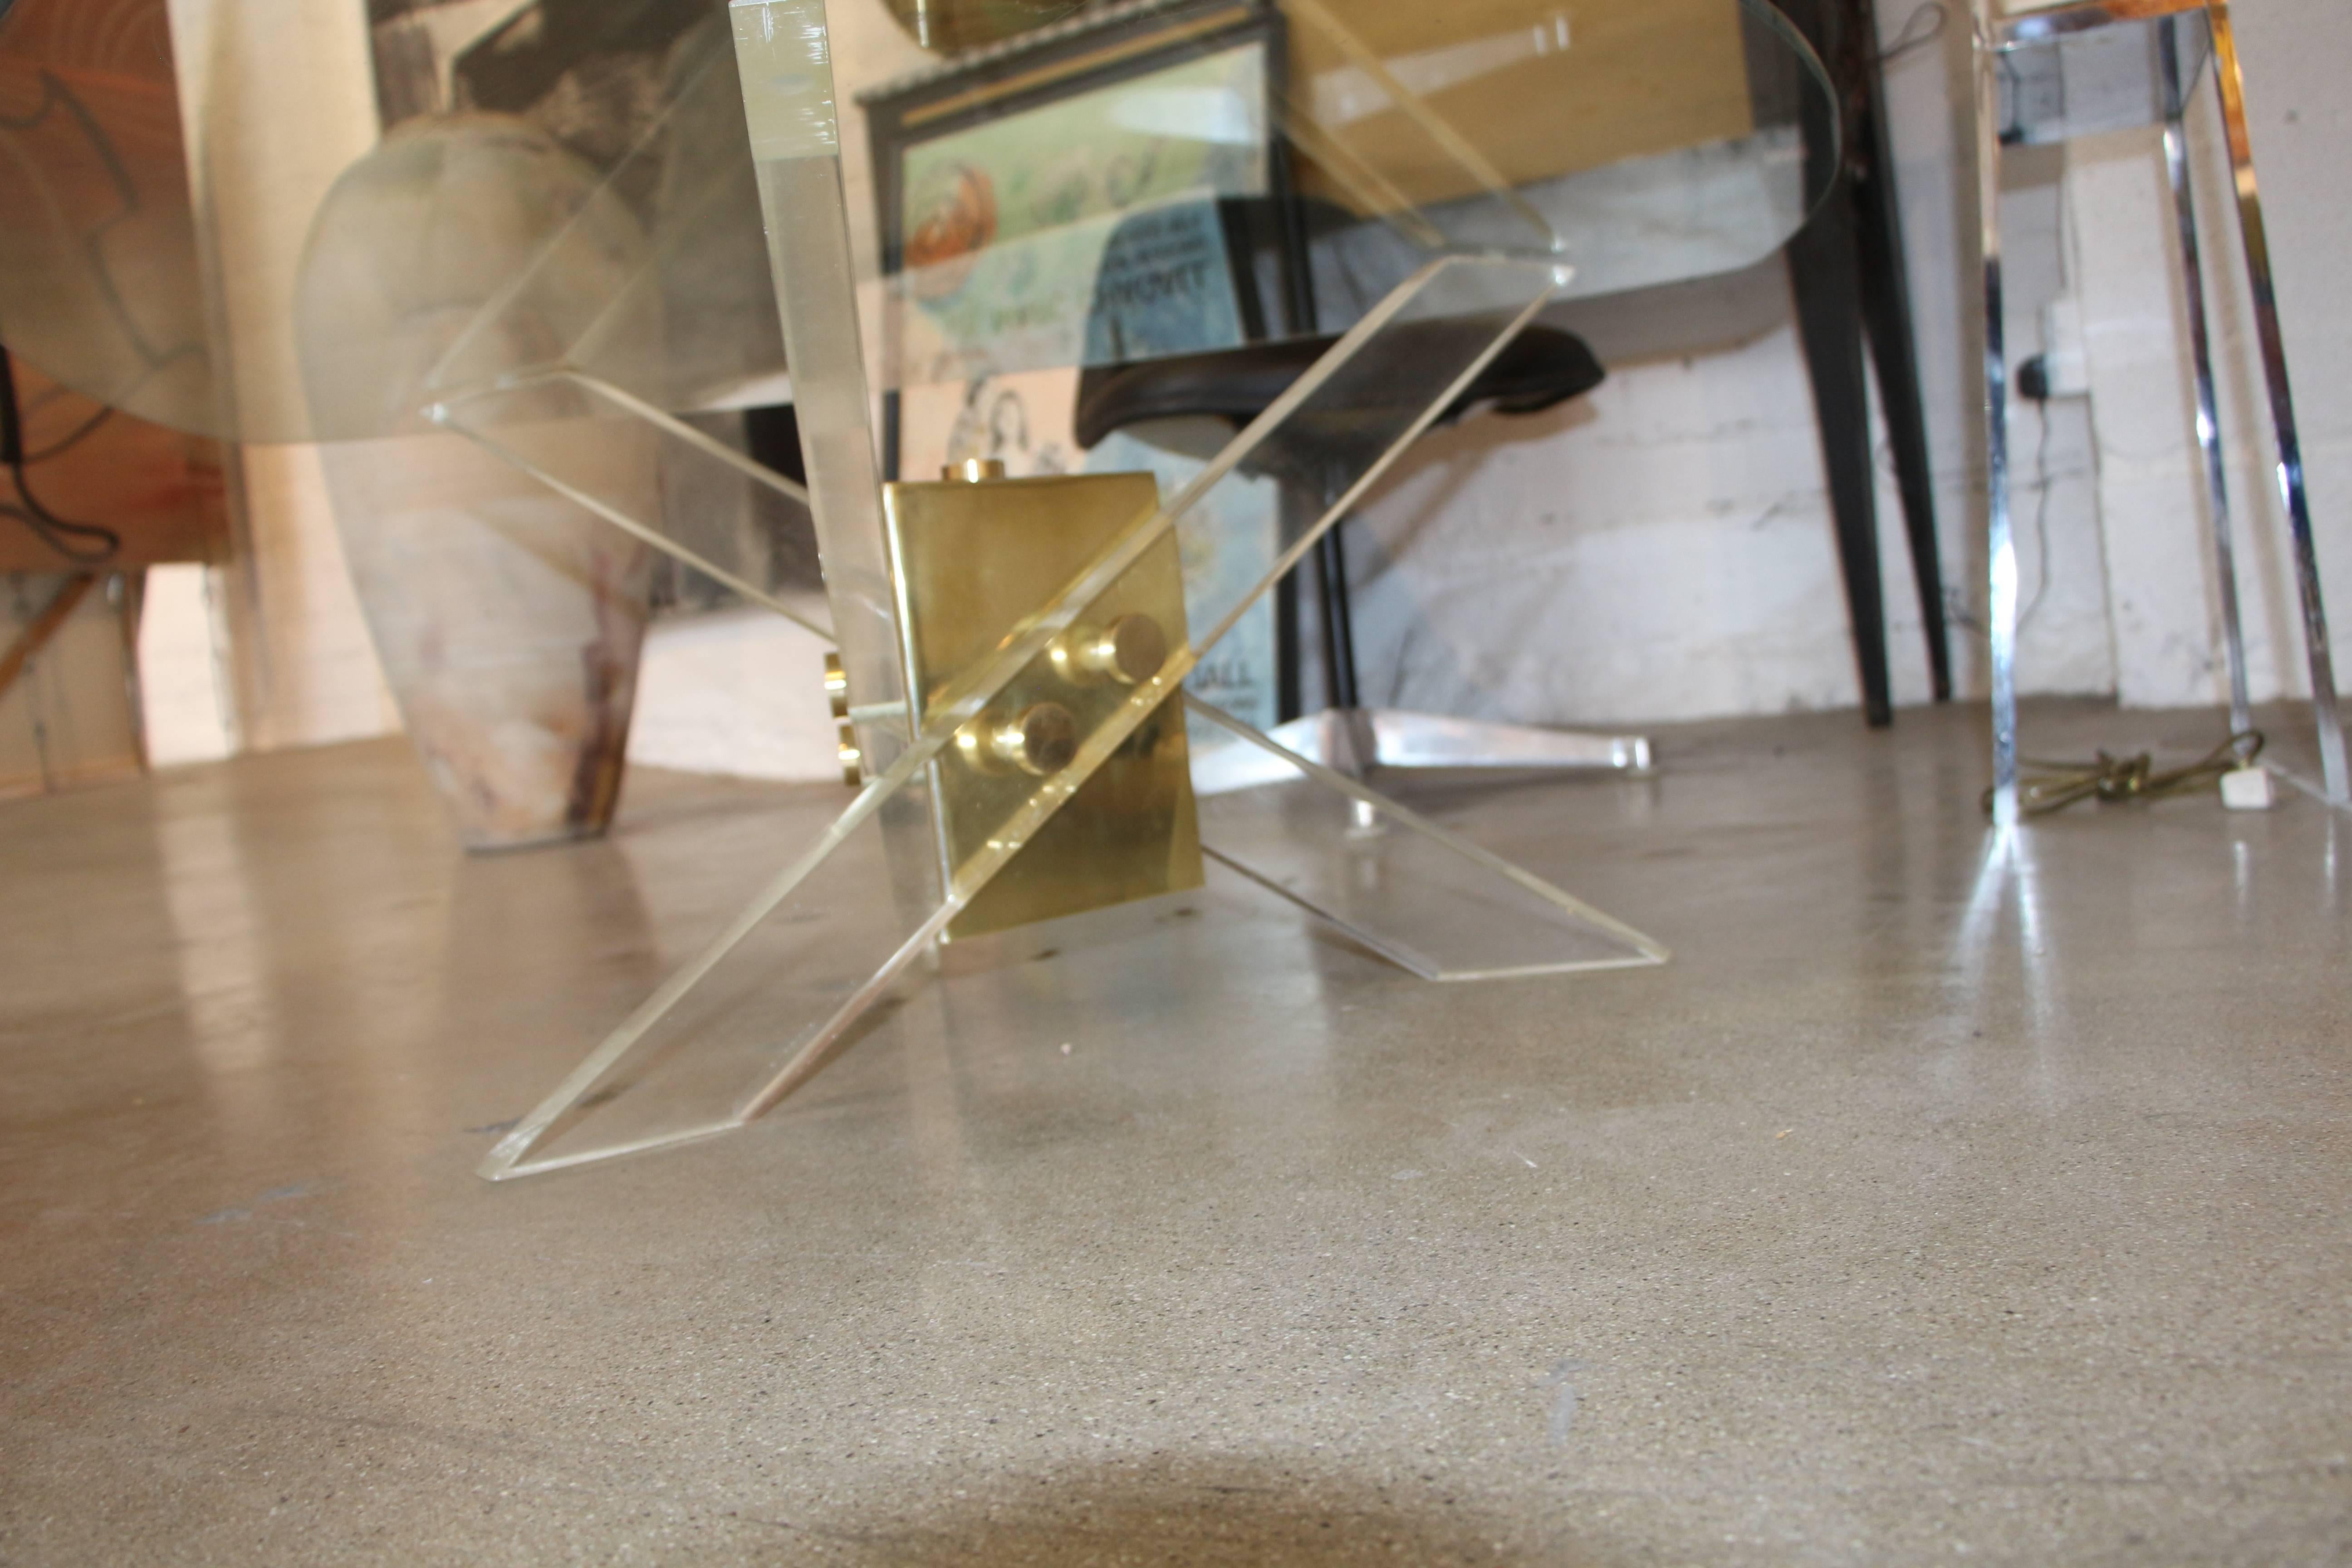 A nice table in the manner of a Pace Collection design. Nice Lucite legs with a triangular glass top. The glass top has scratches and the Lucite legs show some crazing and age appropriate nicks and scratches.